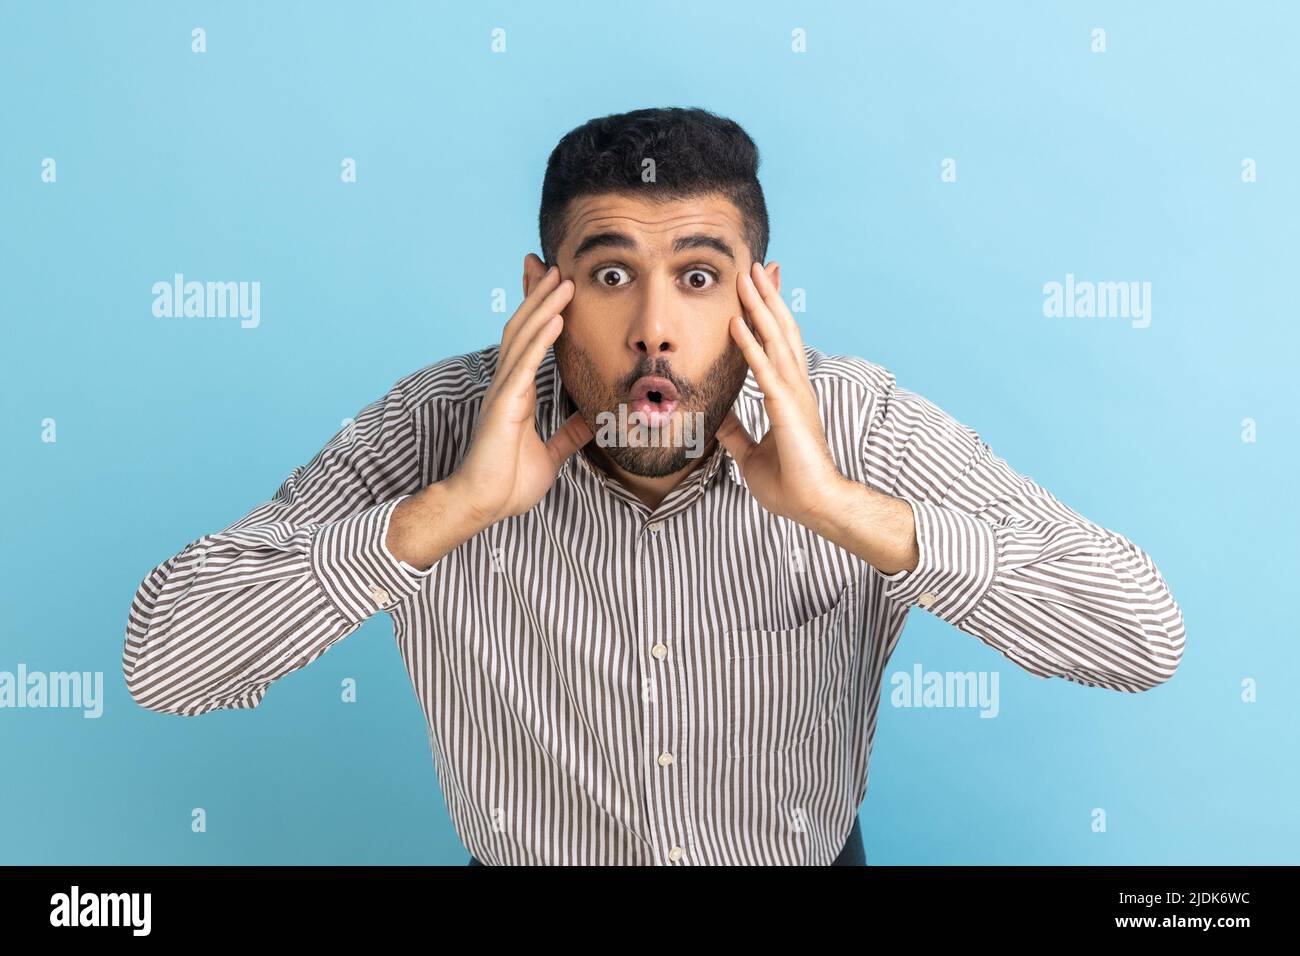 Wow, it's unbelievable. Surprised businessman staring at camera with widely open mouth and big eyes, raising arms in amazement, wearing striped shirt. Indoor studio shot isolated on blue background. Stock Photo